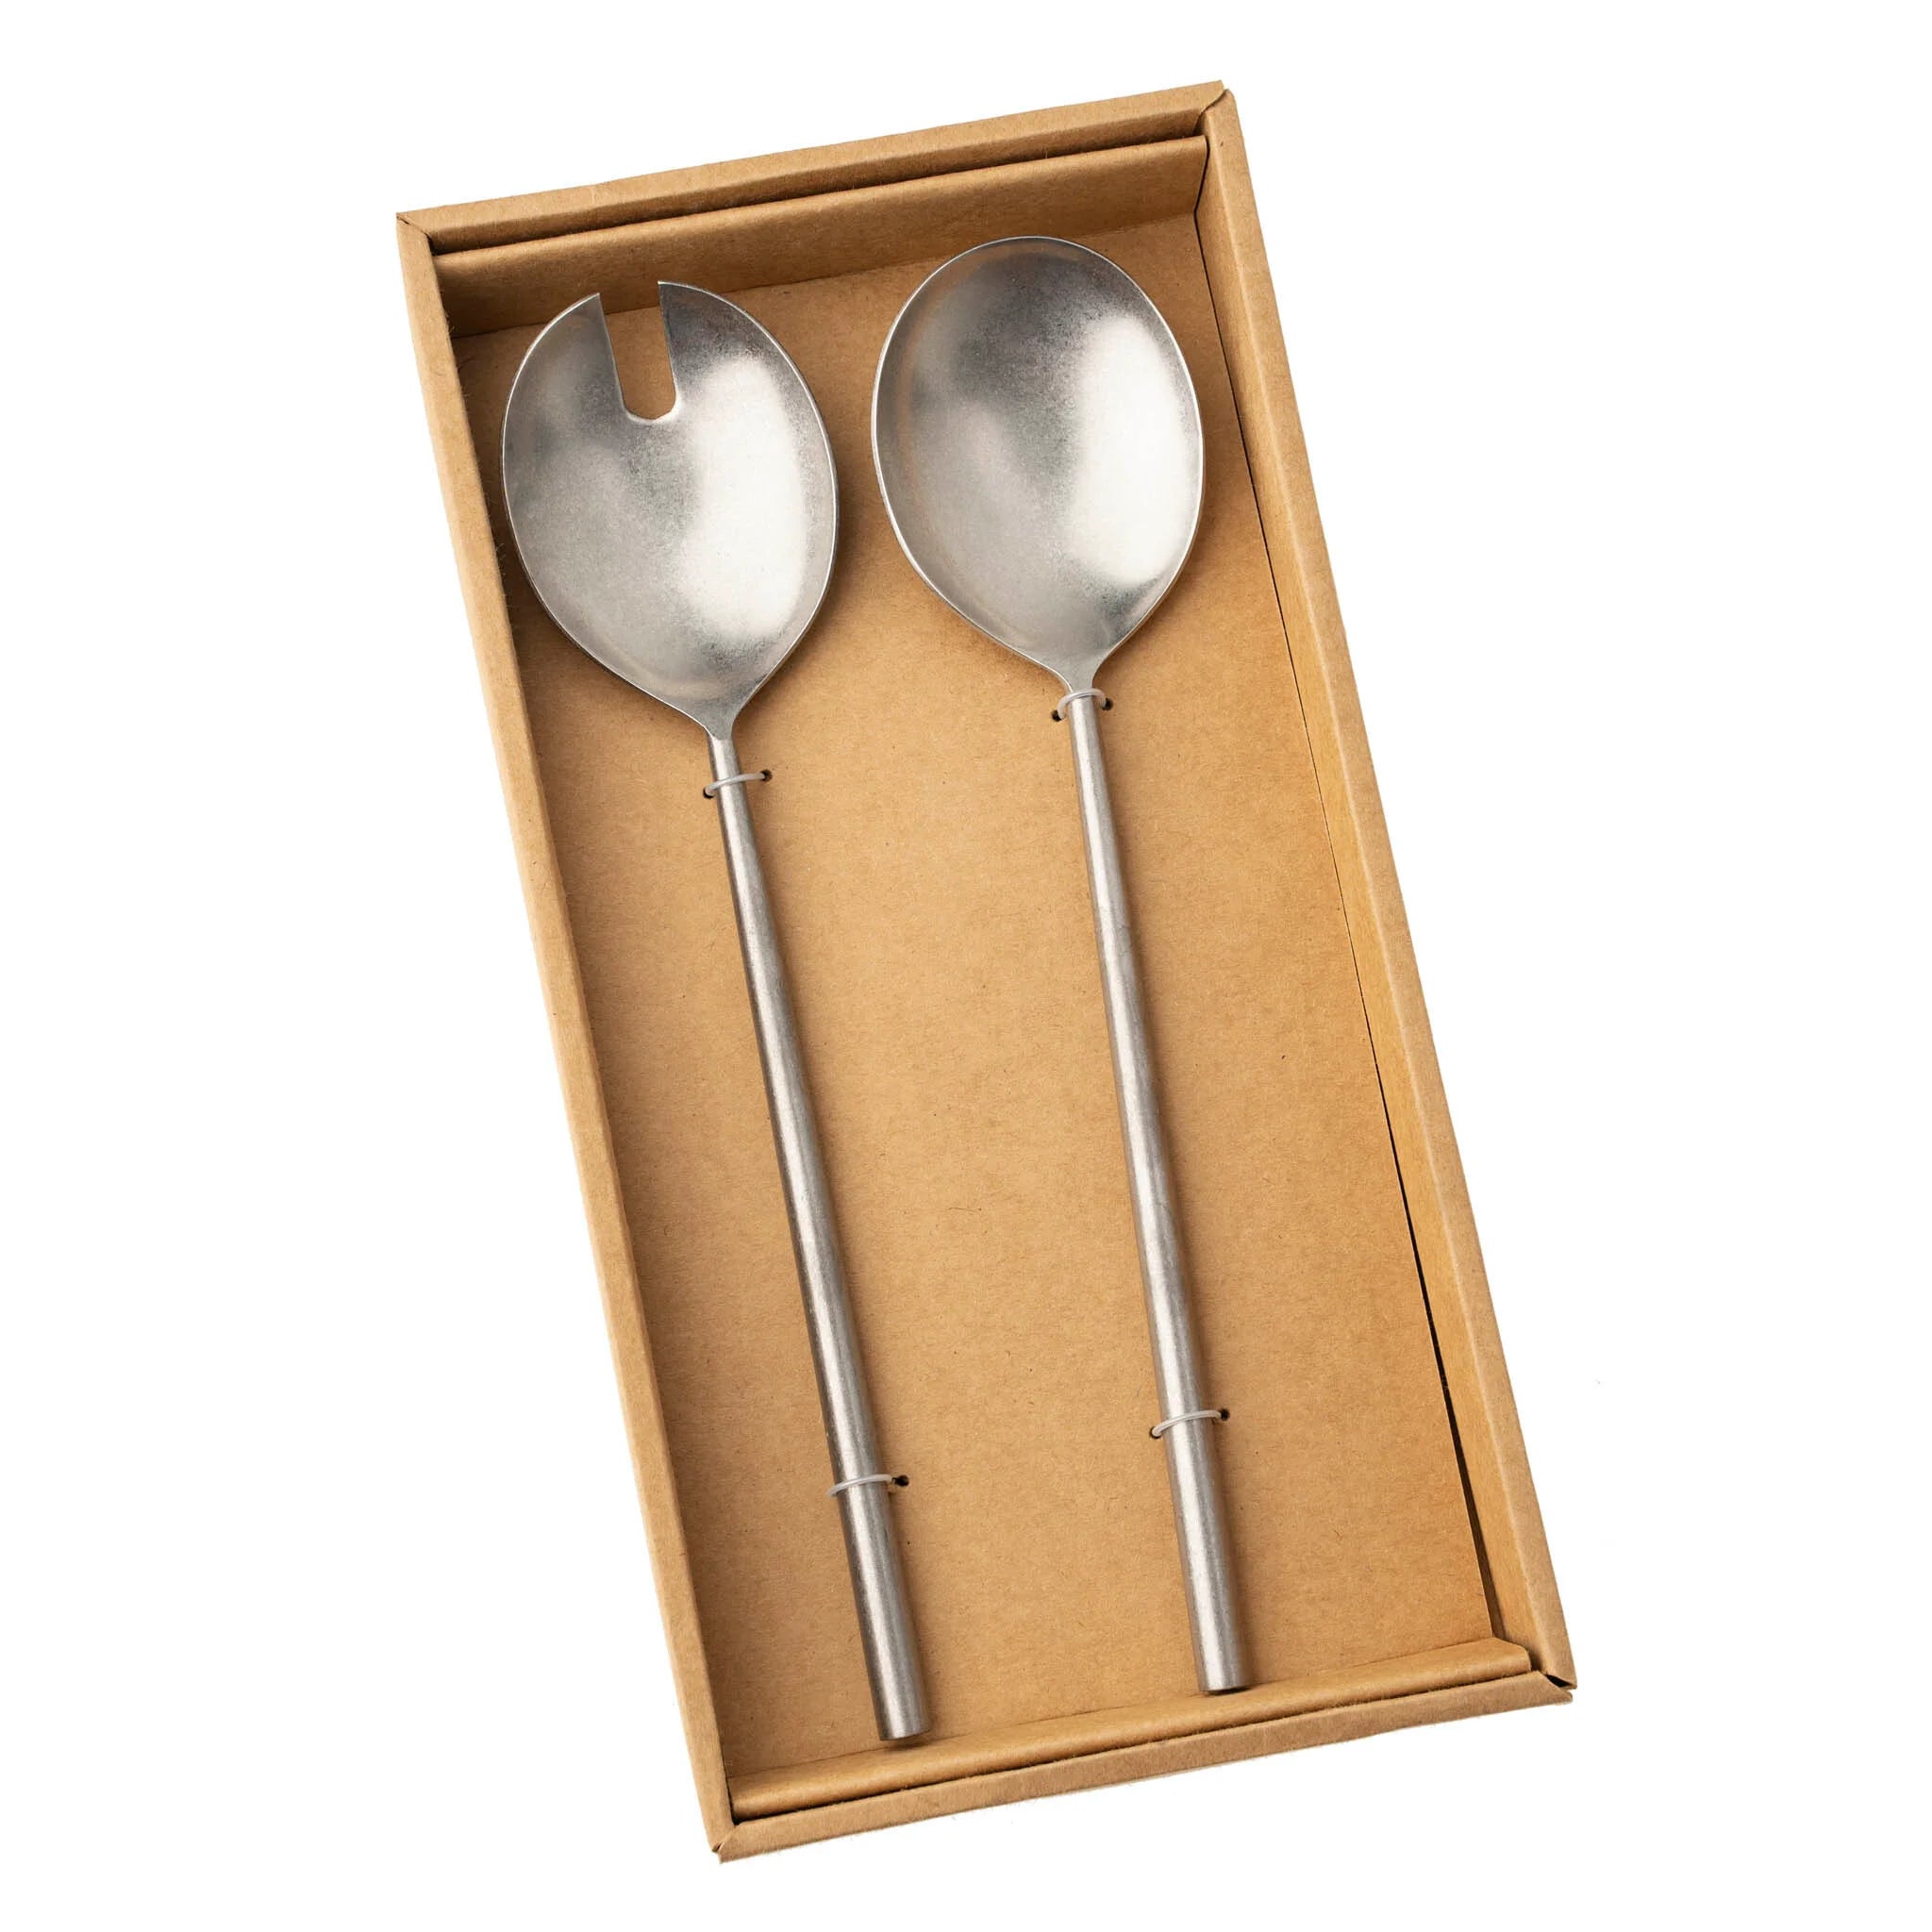 Tides Salad Servers Stainless